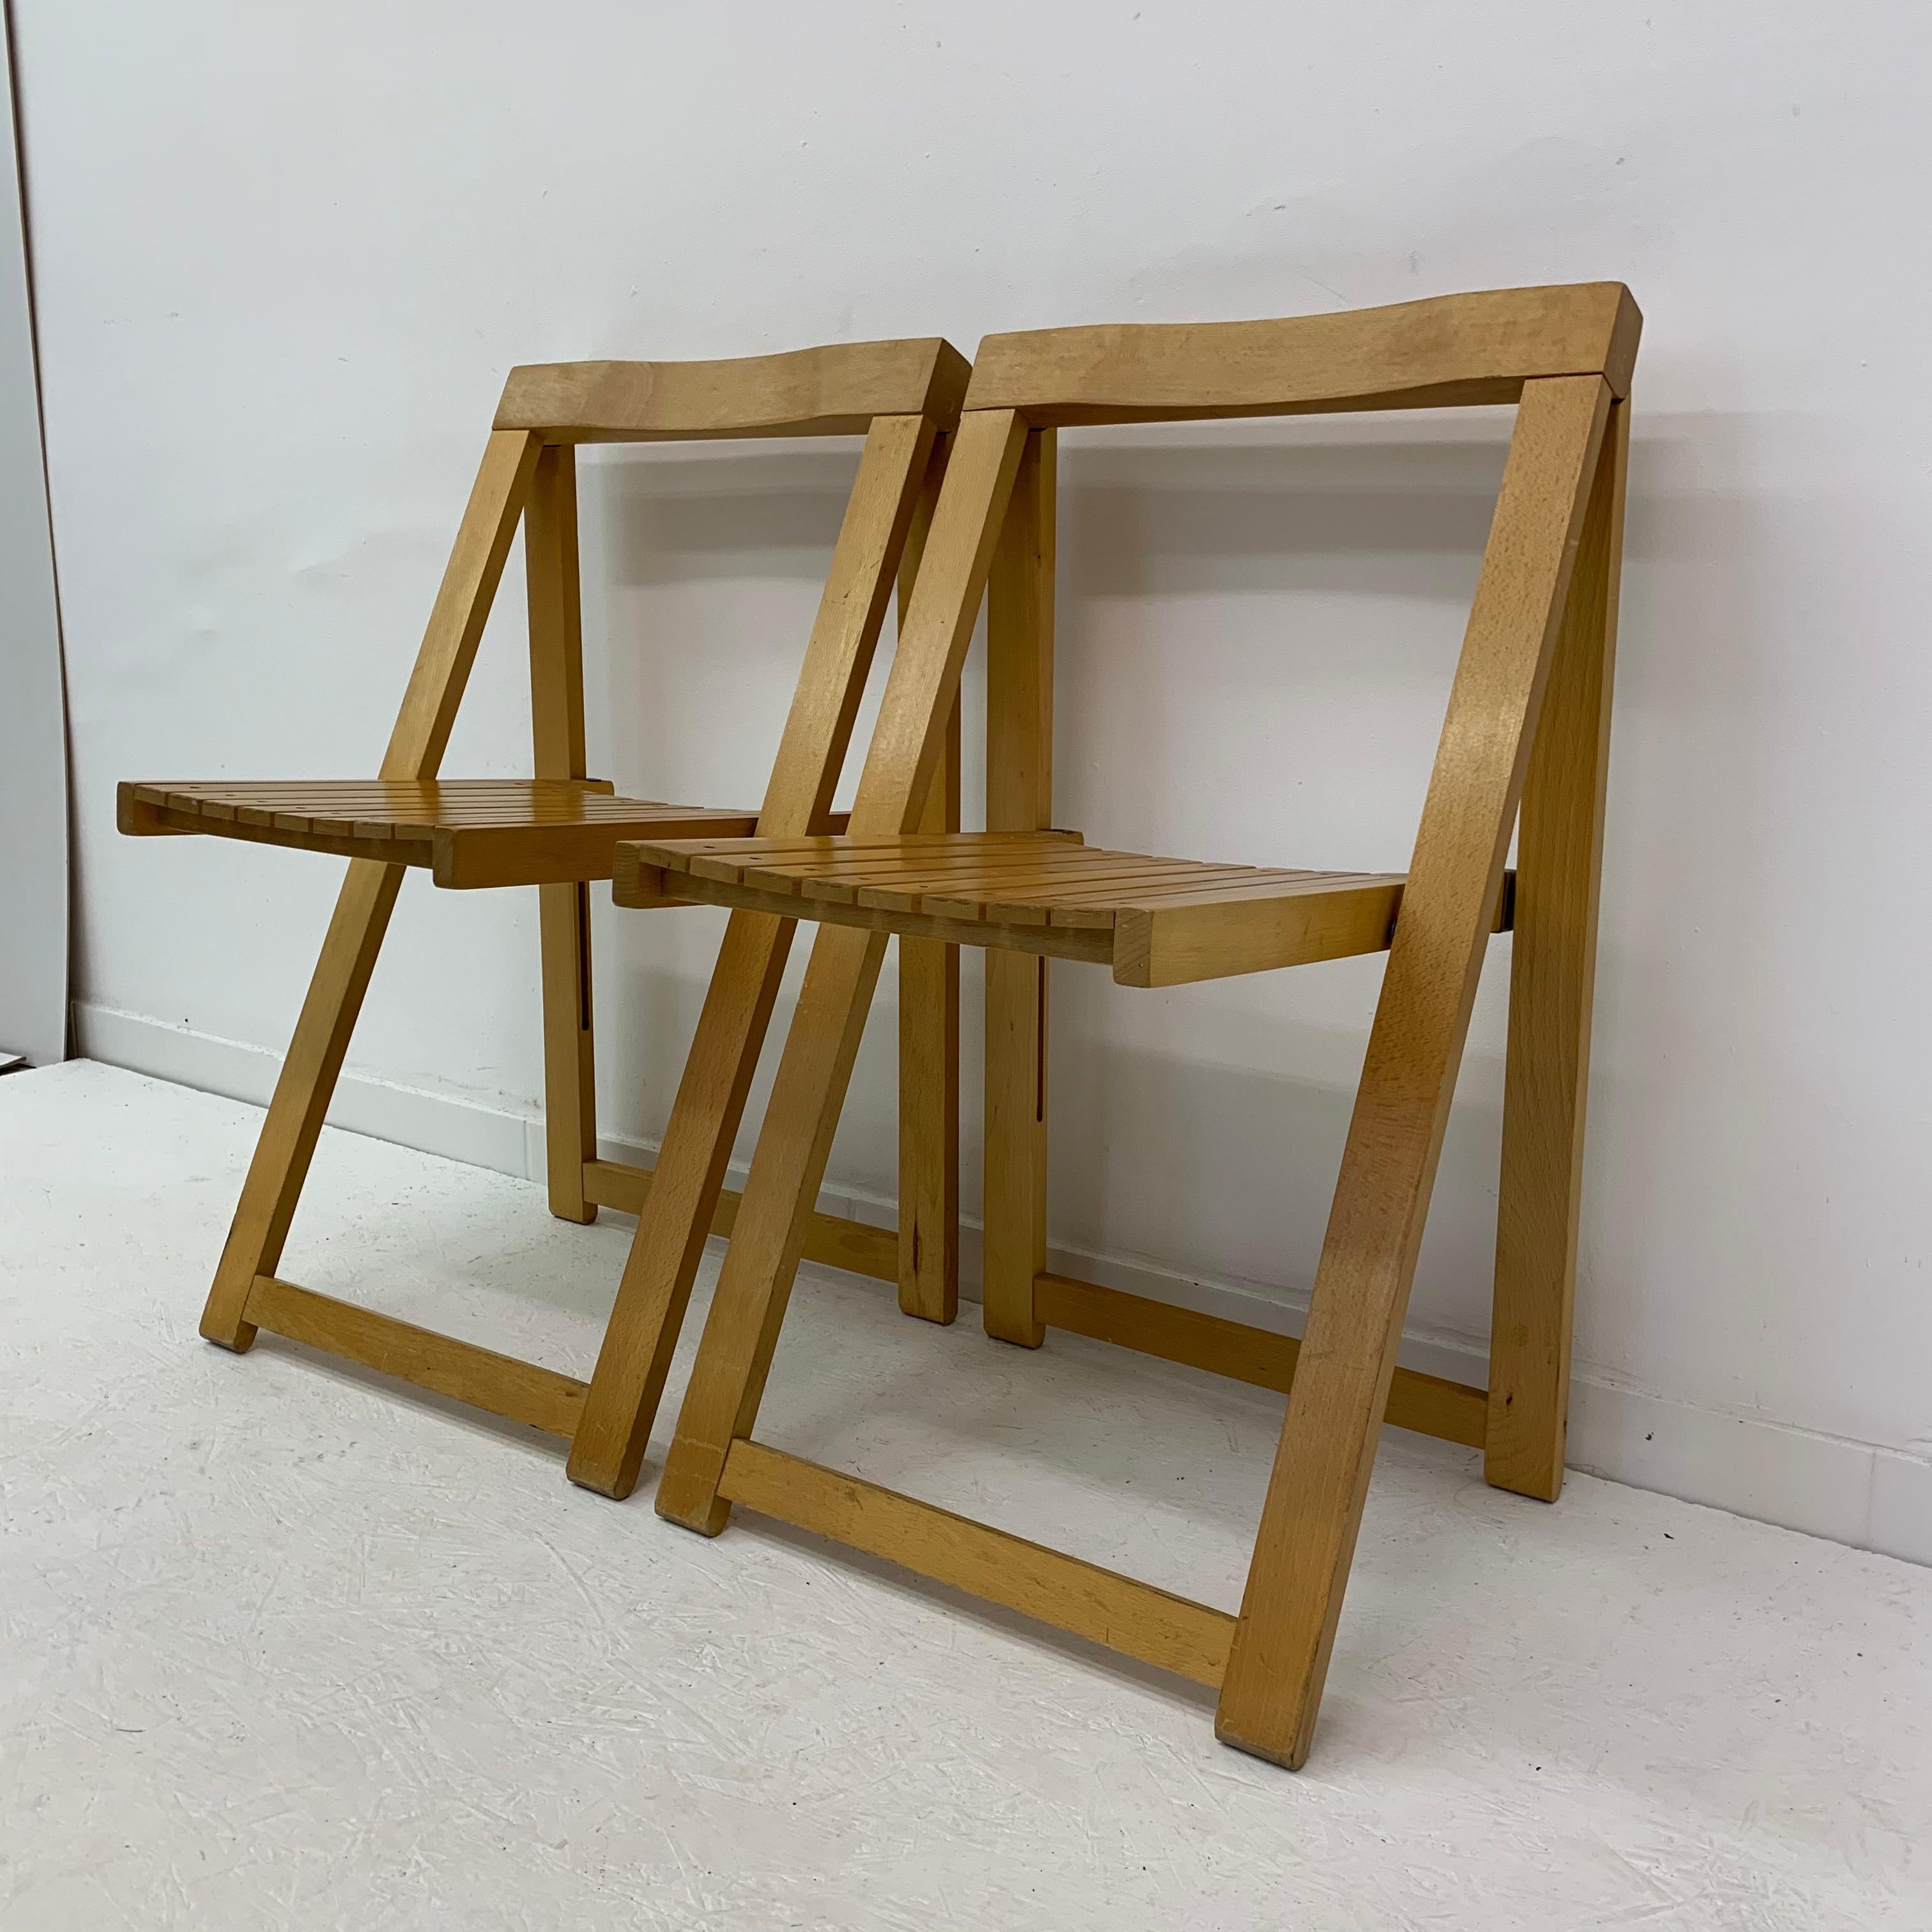 Set of 2 Aldo Jacober for Alberto Bazzani folding chairs, 1960’s For Sale 10